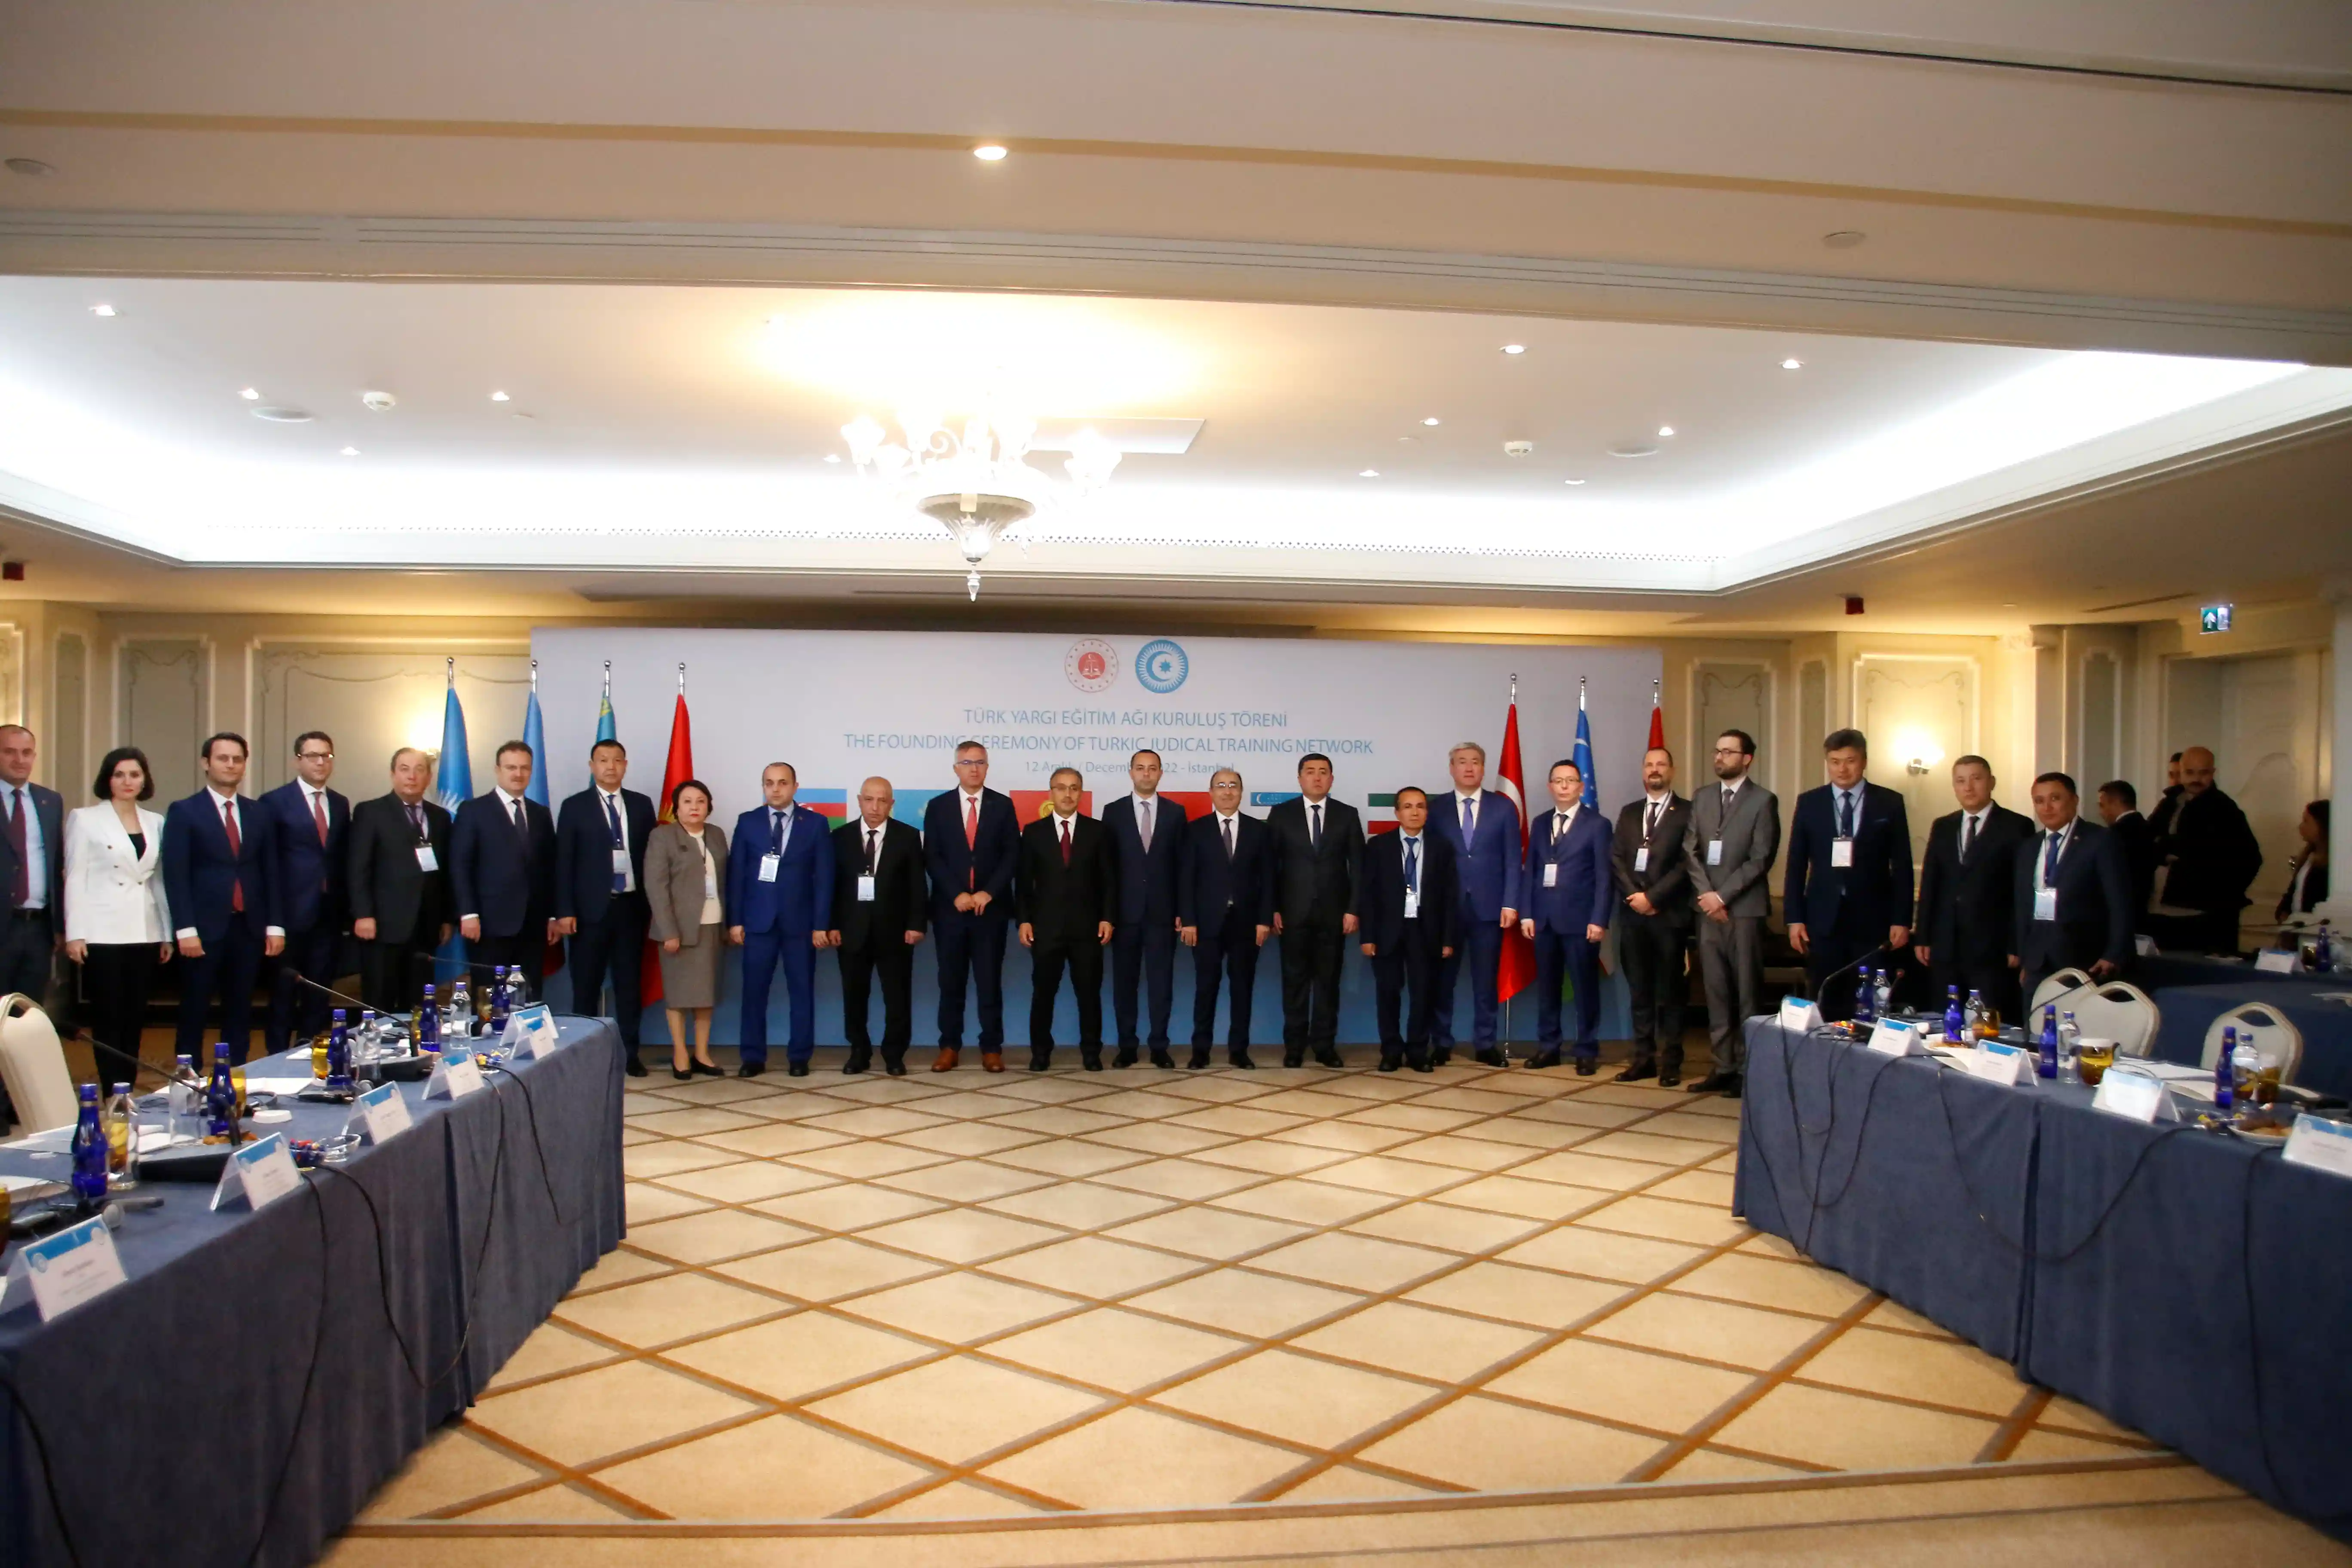 A MEMORANDUM OF UNDERSTANDING WAS SIGNED ON THE FOUNDING OF THE TURKIC JUDICIAL TRAINING NETWORK (TJTN) IN COOPERATION WITH THE ORGANIZATION OF TURKIC STATES